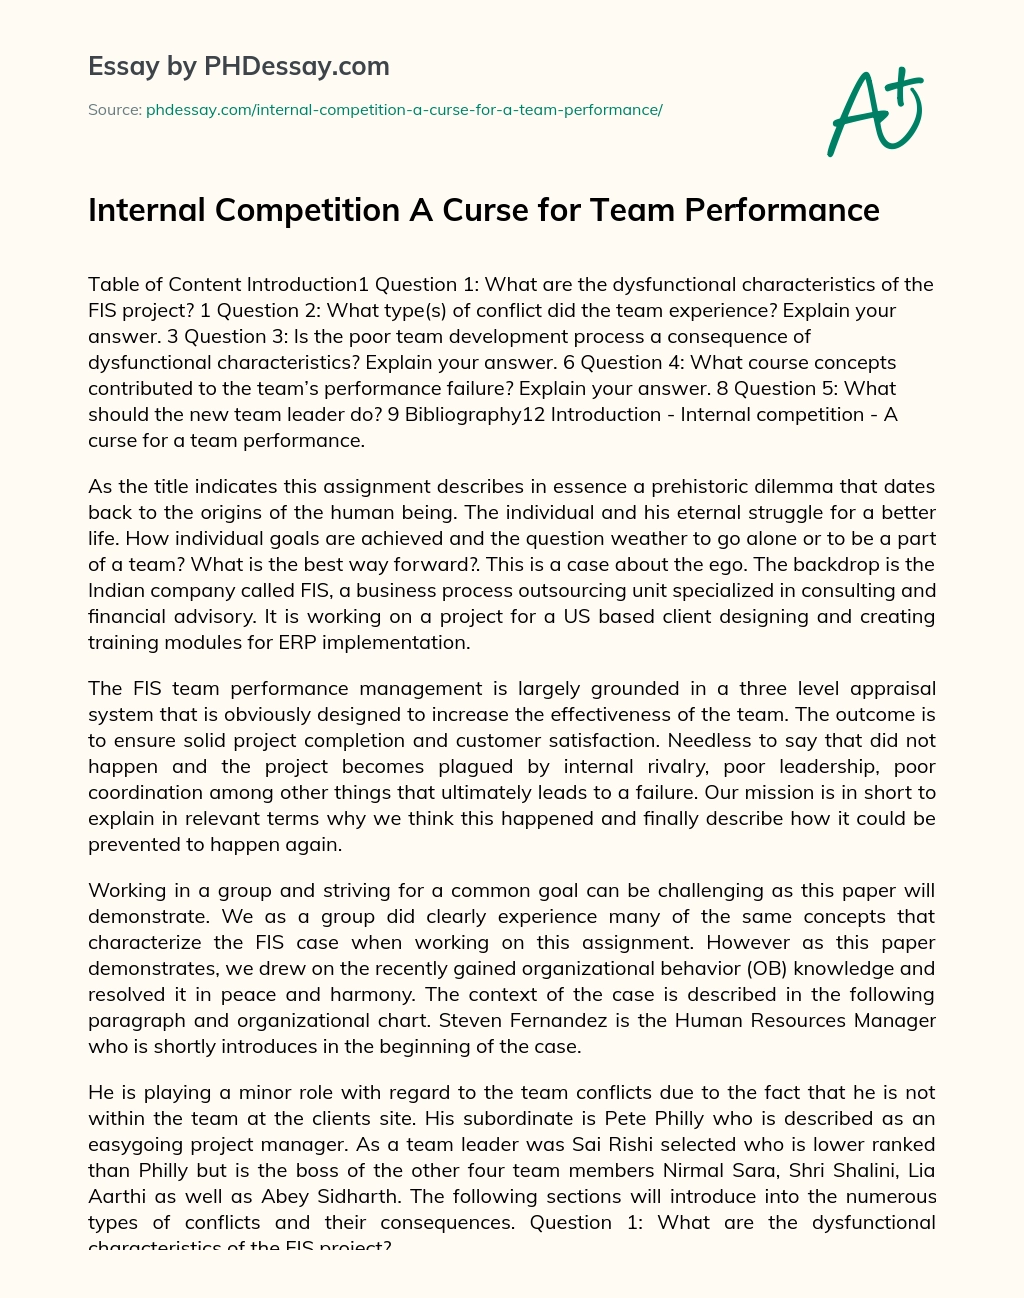 Internal Competition A Curse for Team Performance essay